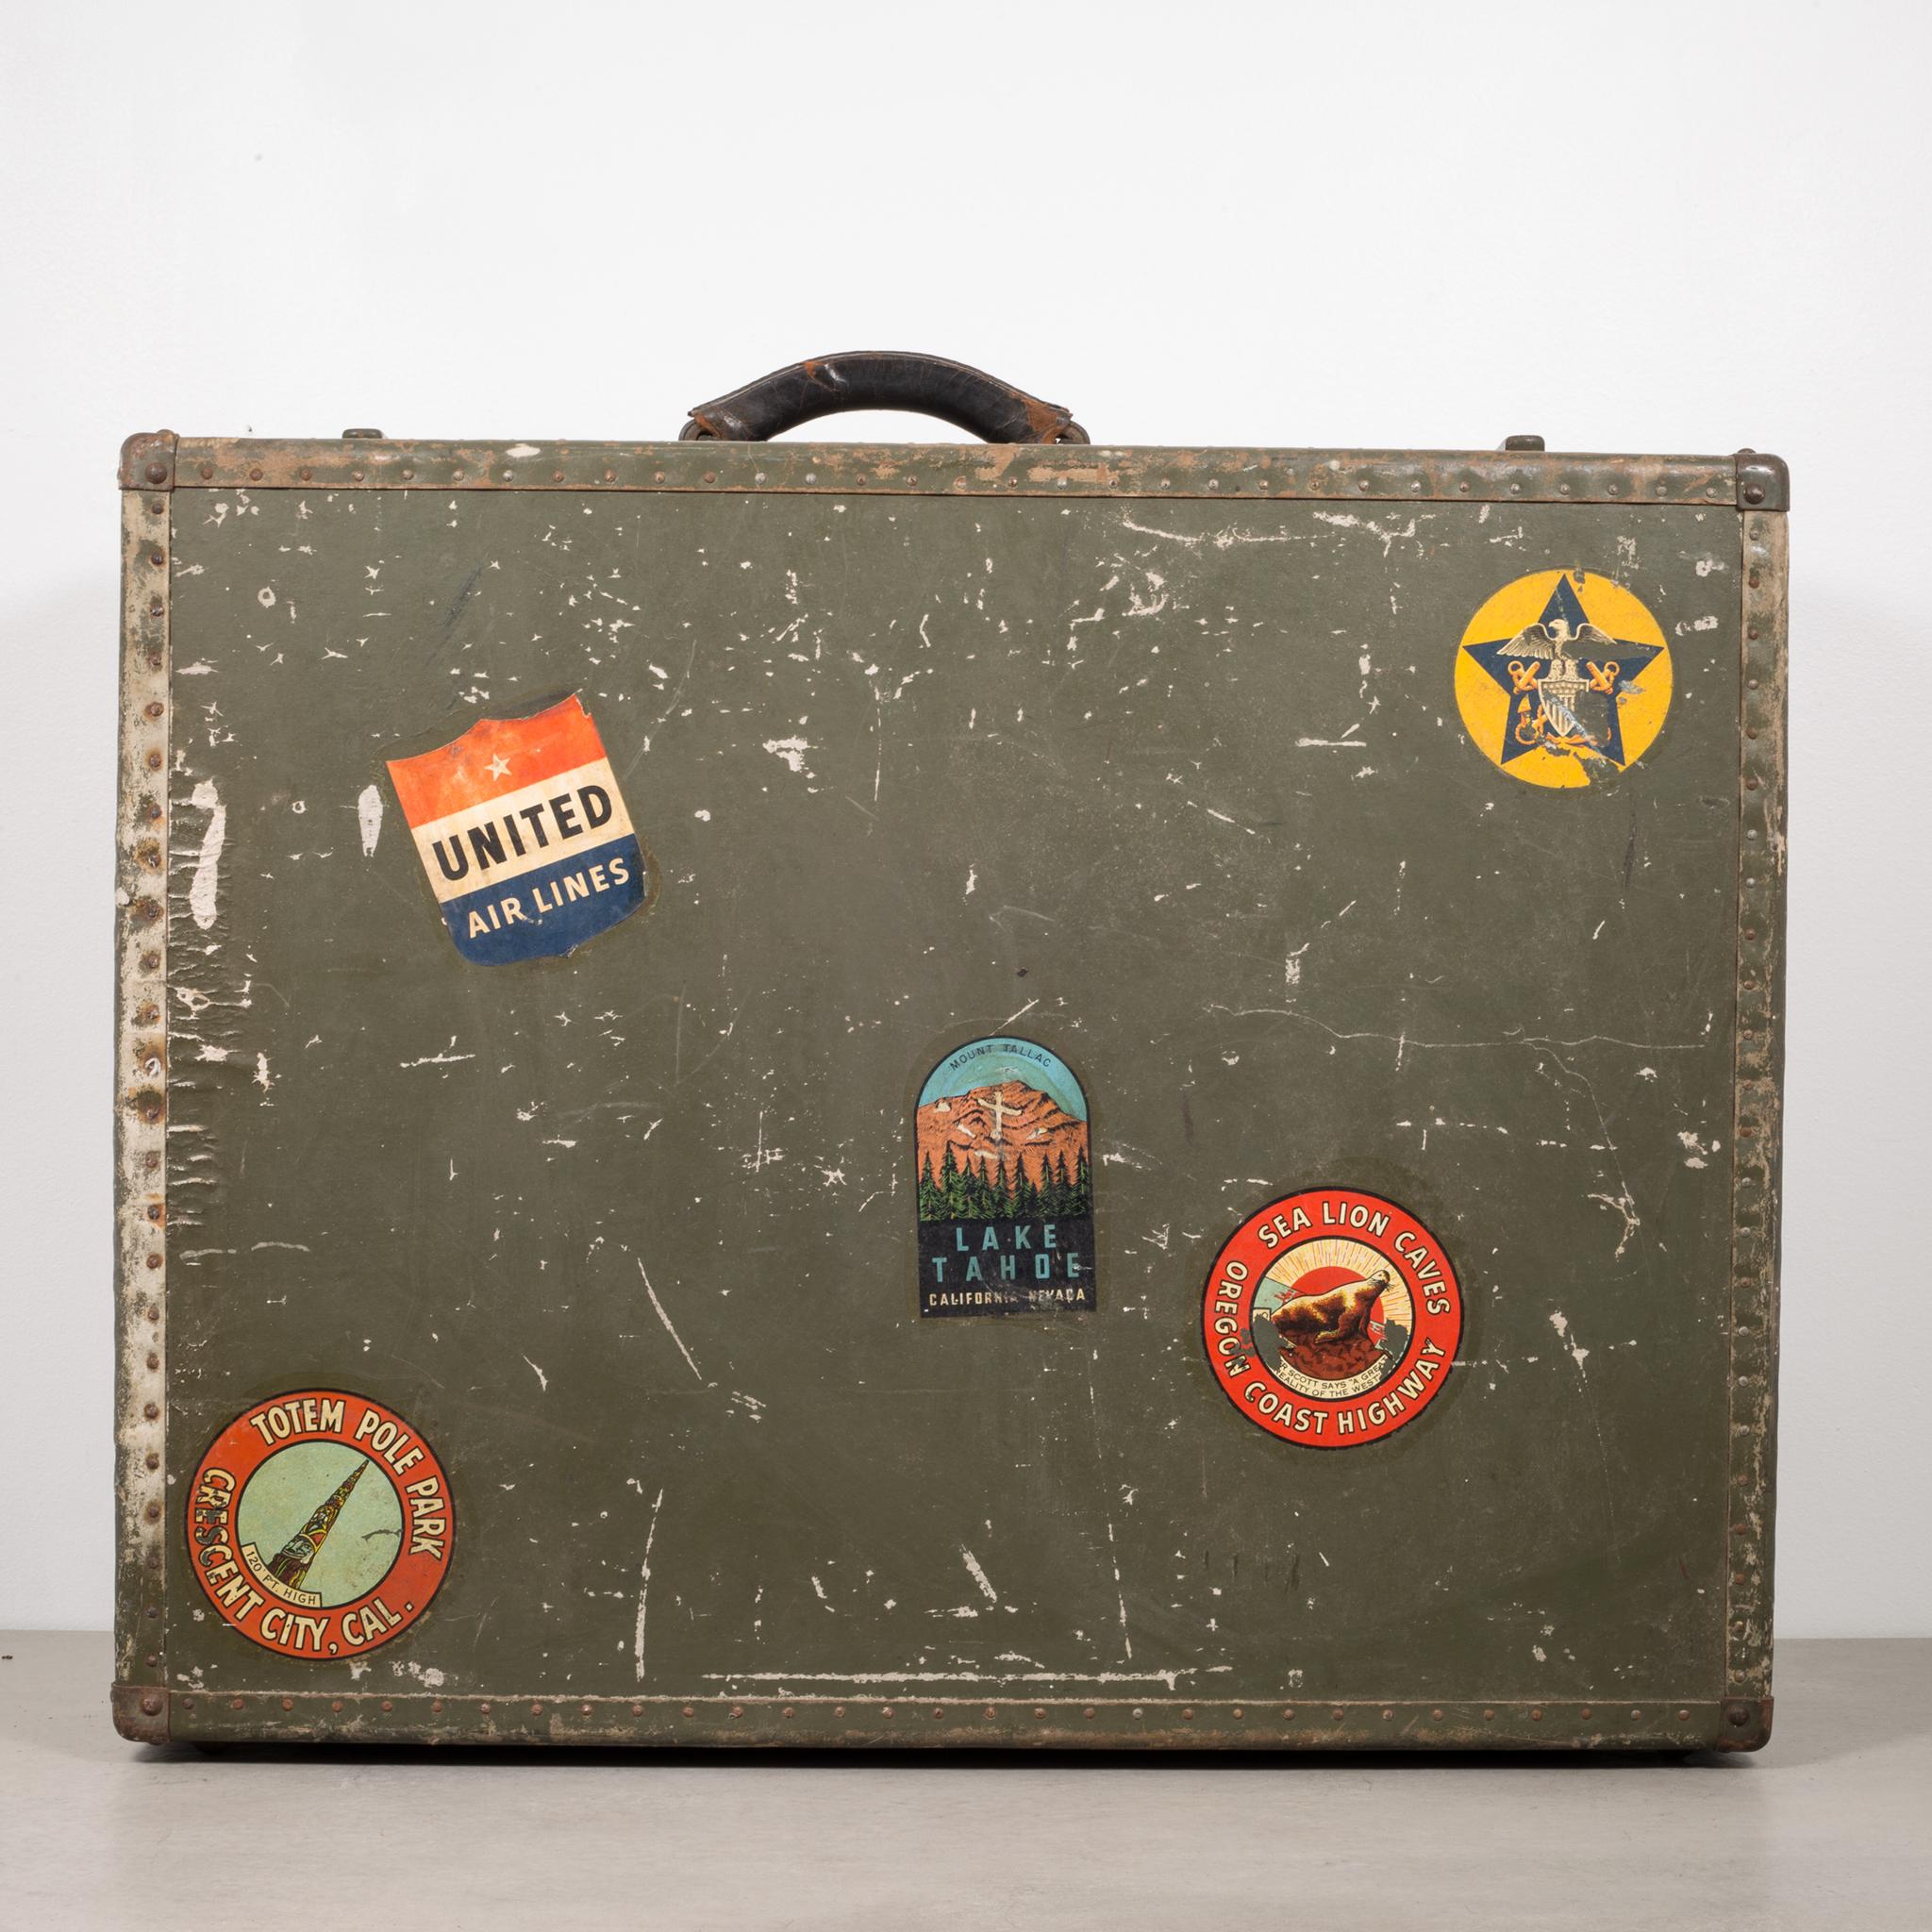 About

This is a vintage suitcase with a thick leather handle and original travel stickers. The suitcase and stickers have retained their original color with some damage on the body.

Creator unknown.
Date of manufacture circa 1940-1950
Materials